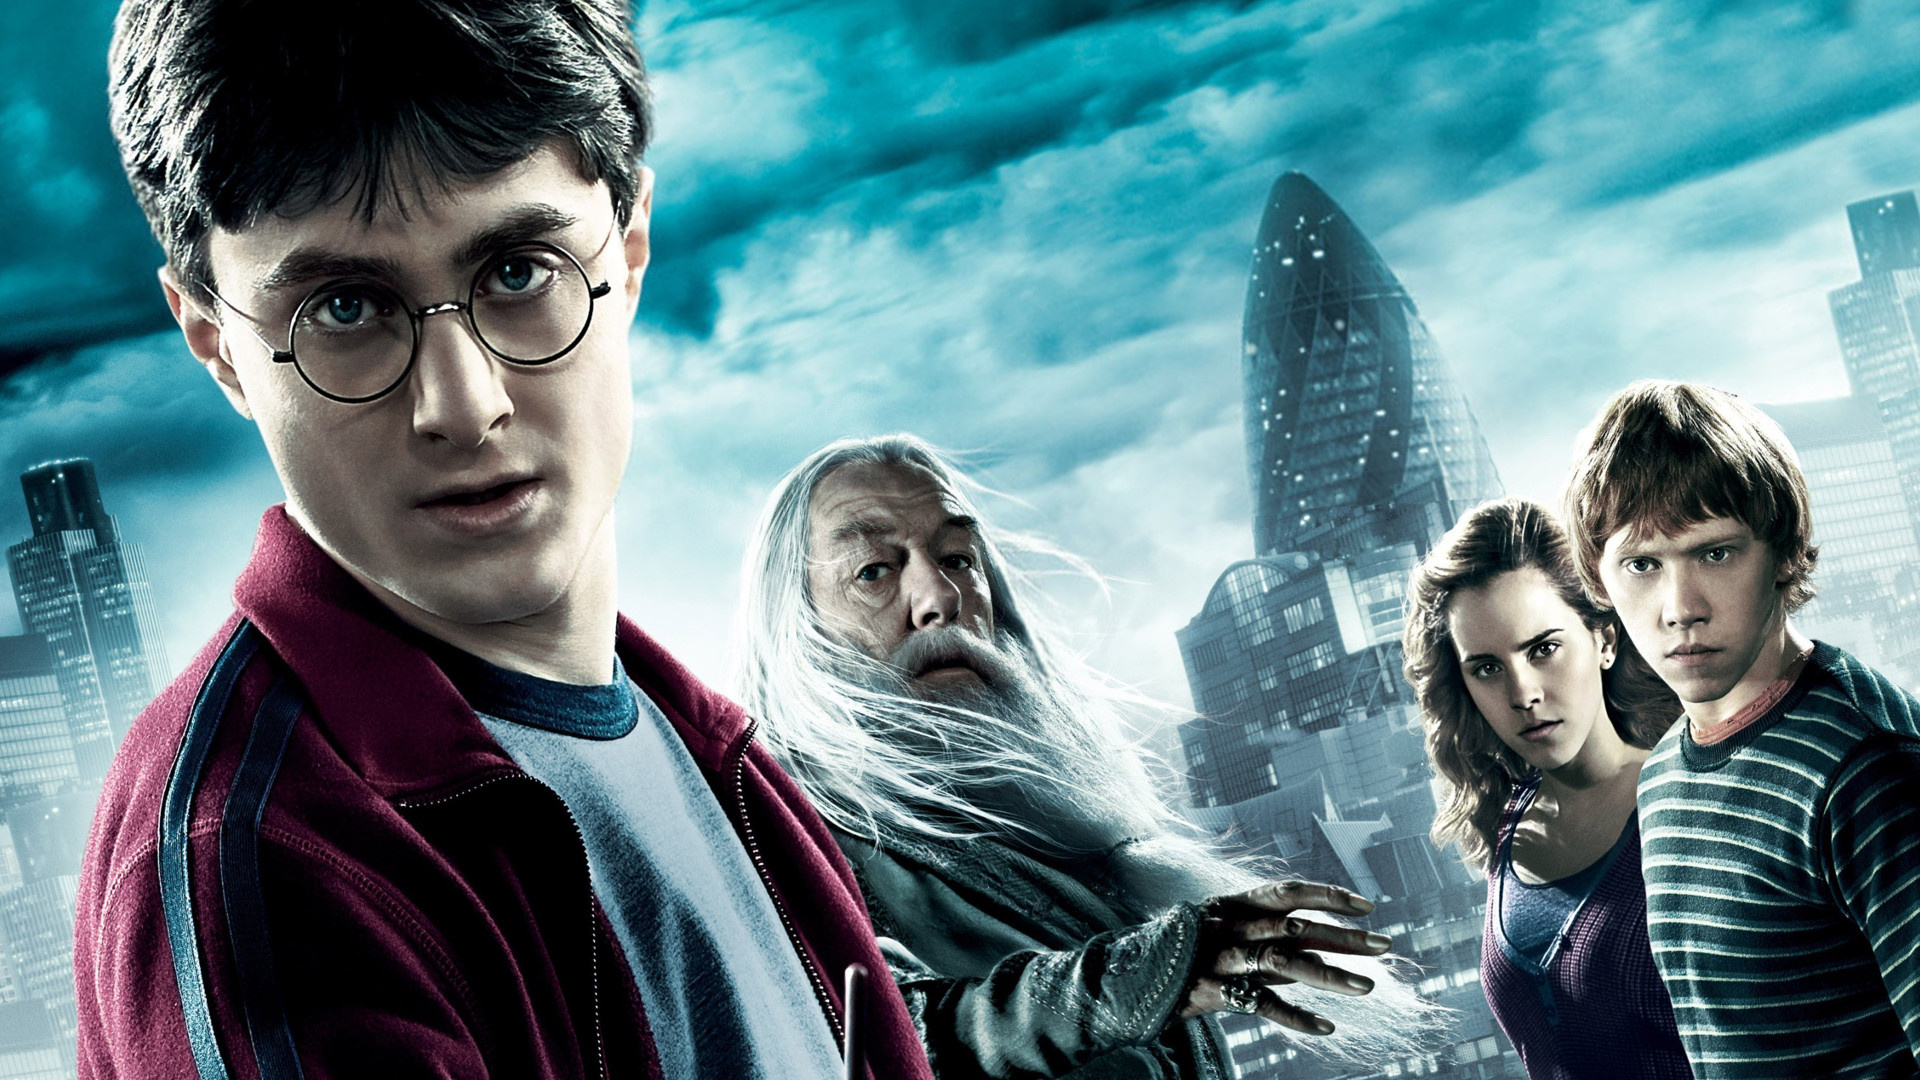 11 things you never knew, Harry Potter, Half-Blood Prince, Moviefone, 1920x1080 Full HD Desktop